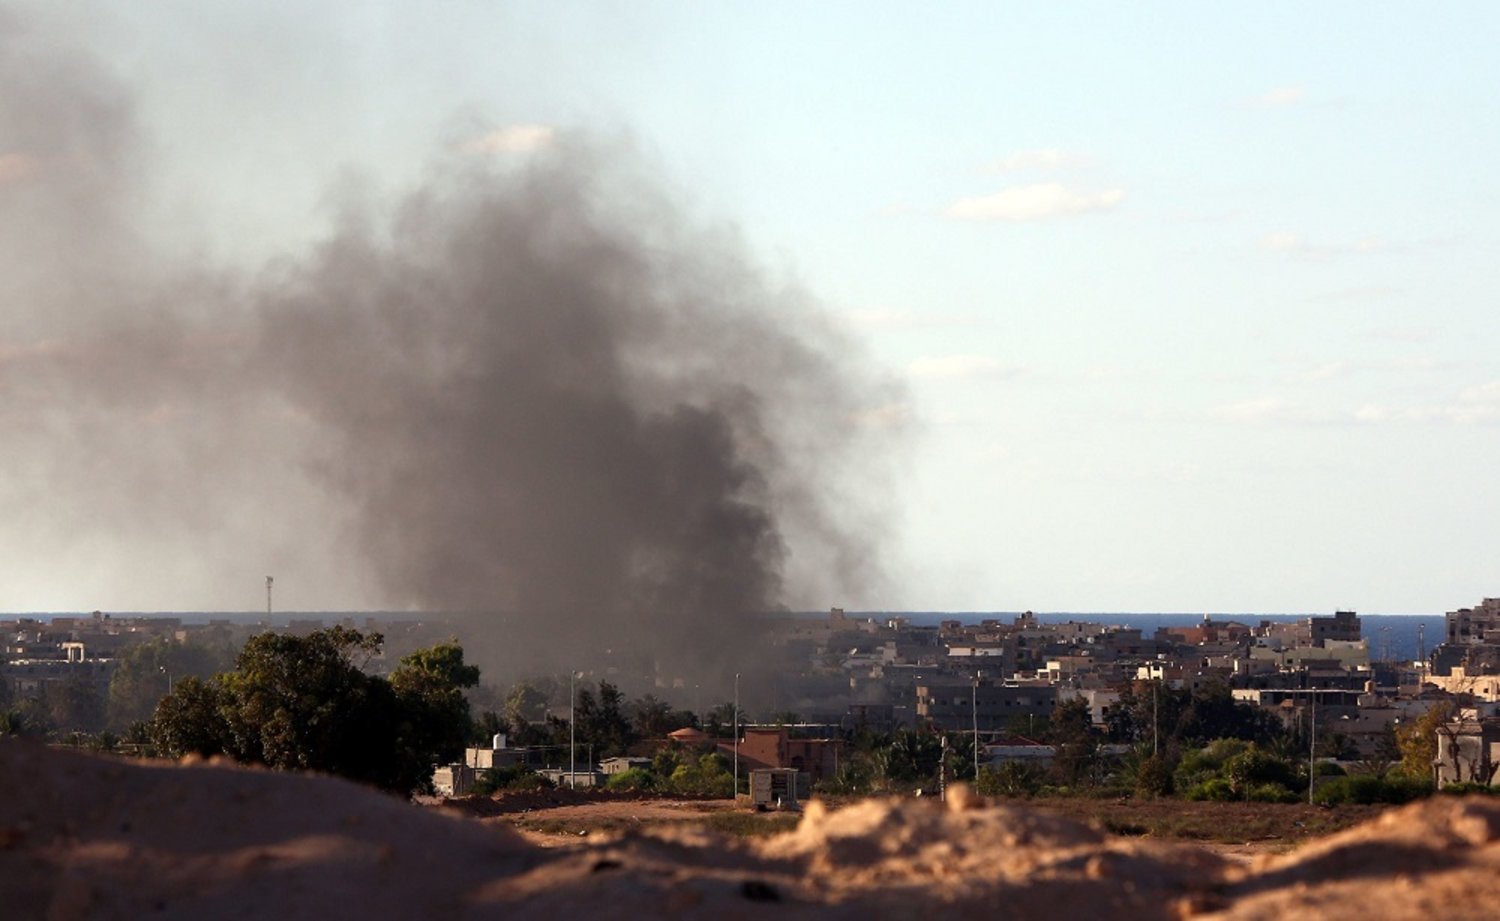 The US carried out an airstrike against an ISIS location in Libya for the first time since September. (AFP)